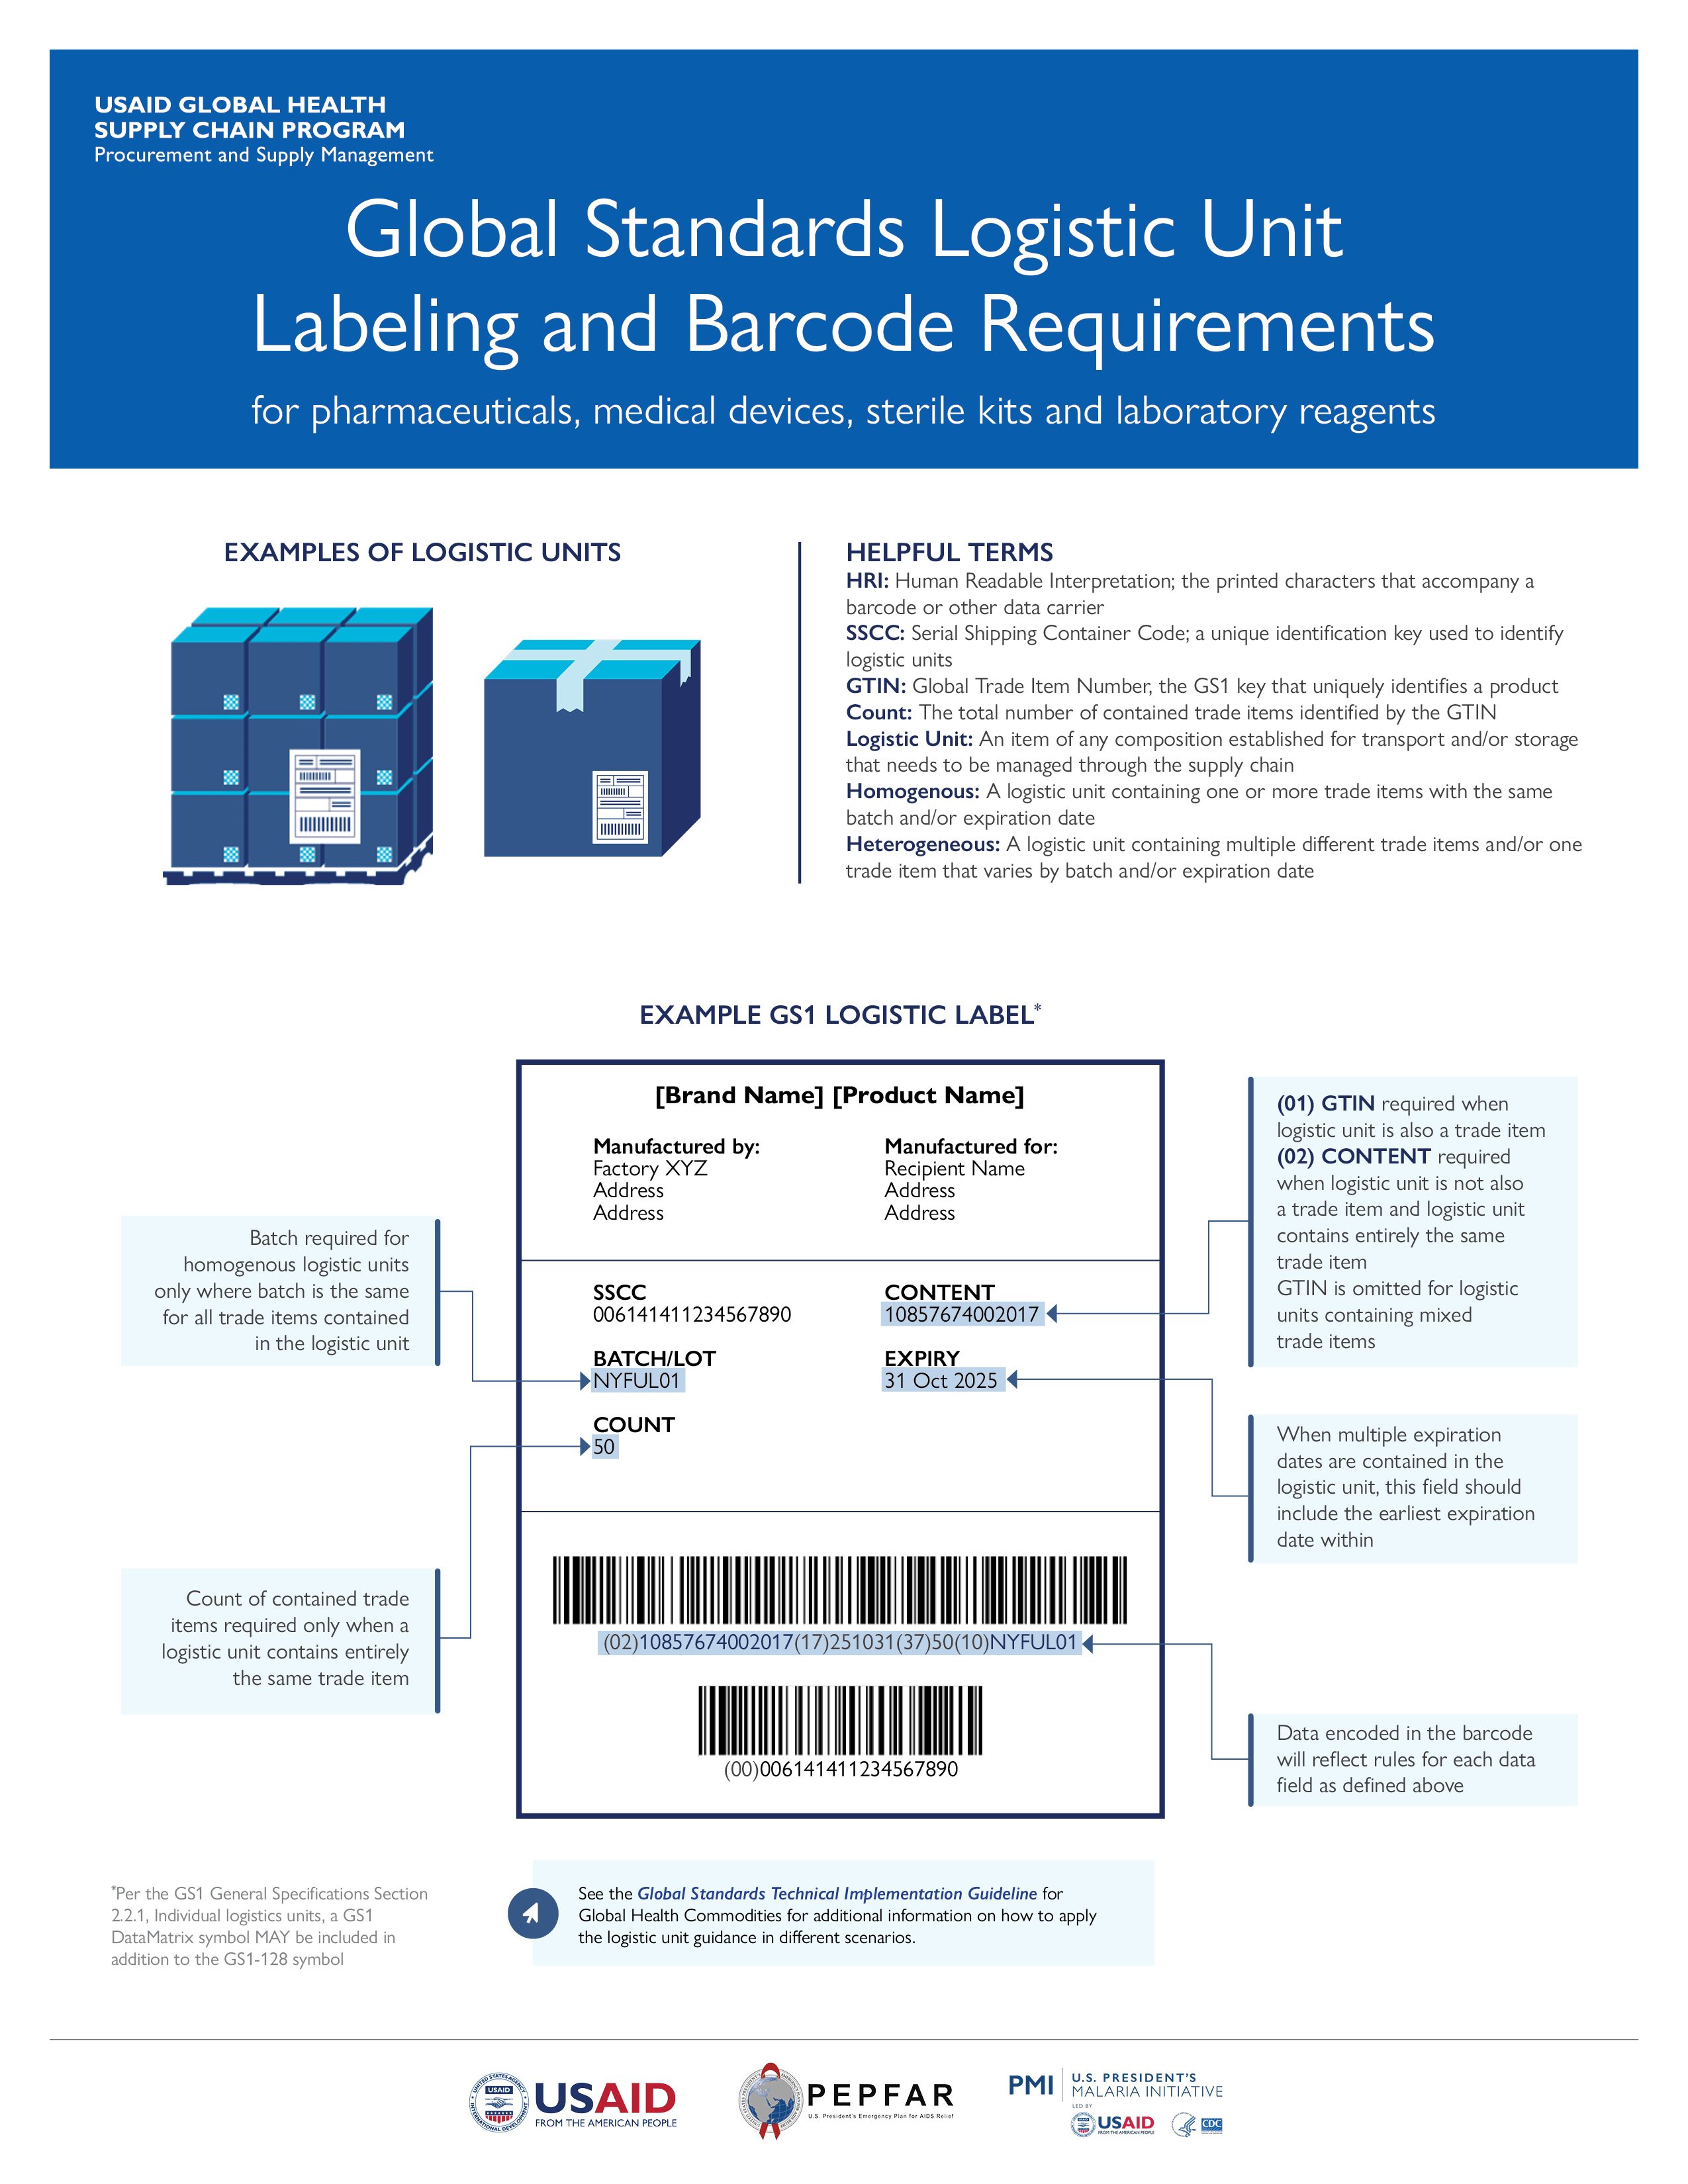 Labeling Guidelines